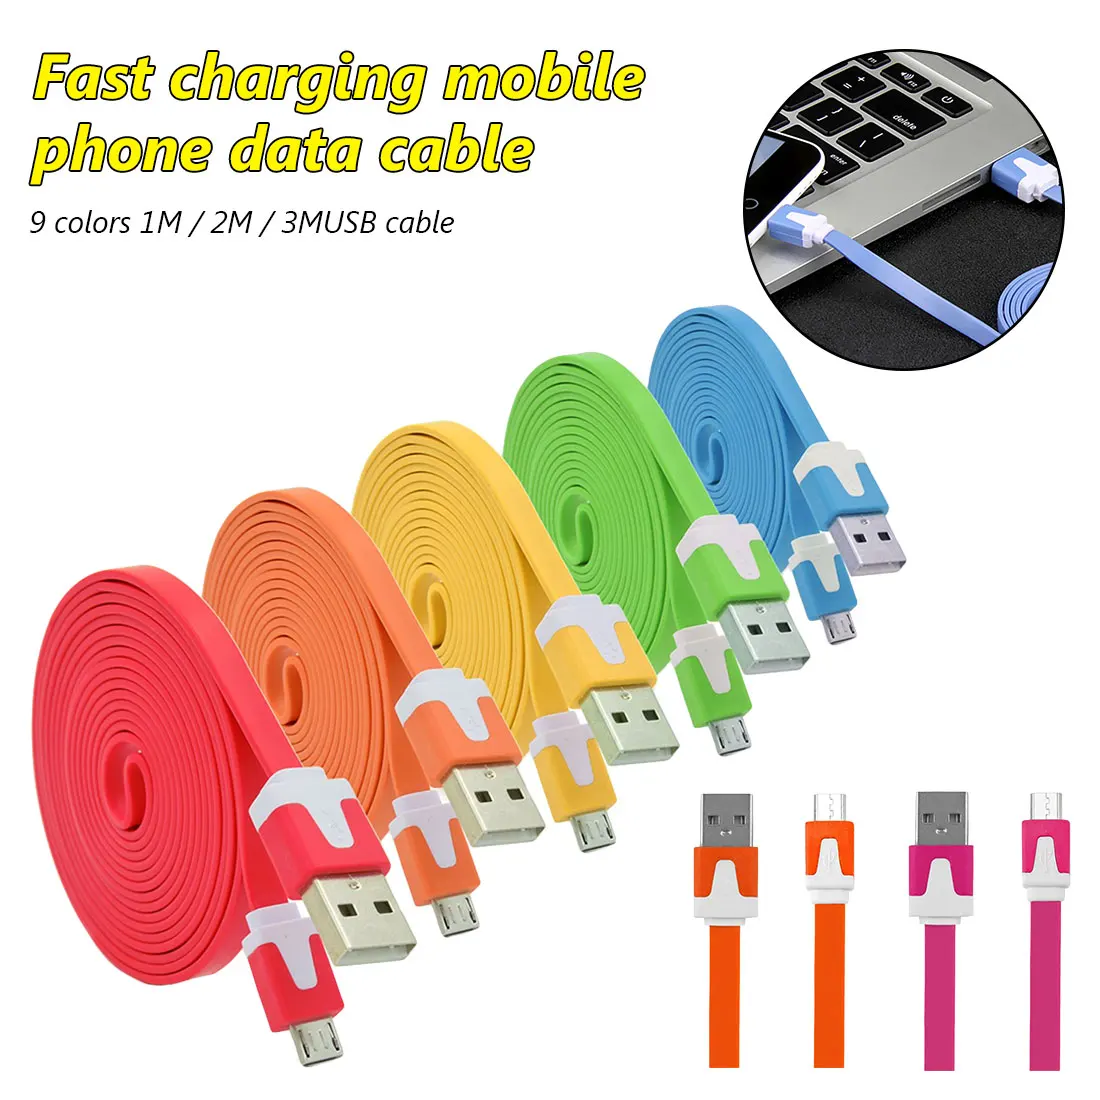 

Micro USB Cable 1M/2M/3M Fast Charging Data Sync Flat Noodle Cable for Samsung Xiaomi Huawei LG HTC Android Phone Cables